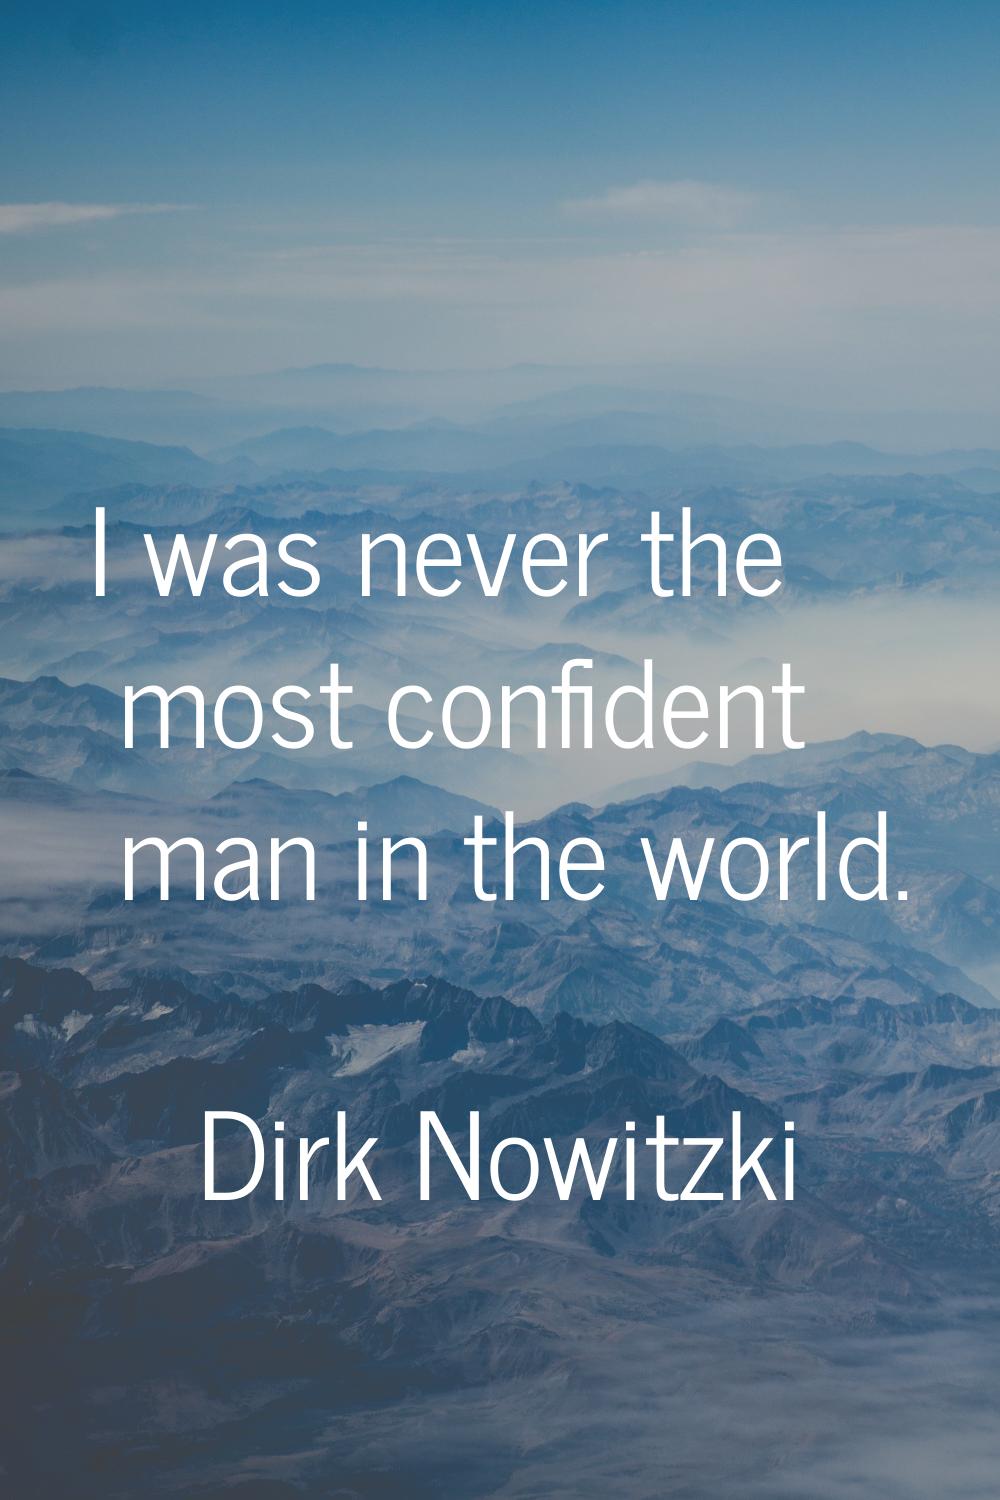 I was never the most confident man in the world.